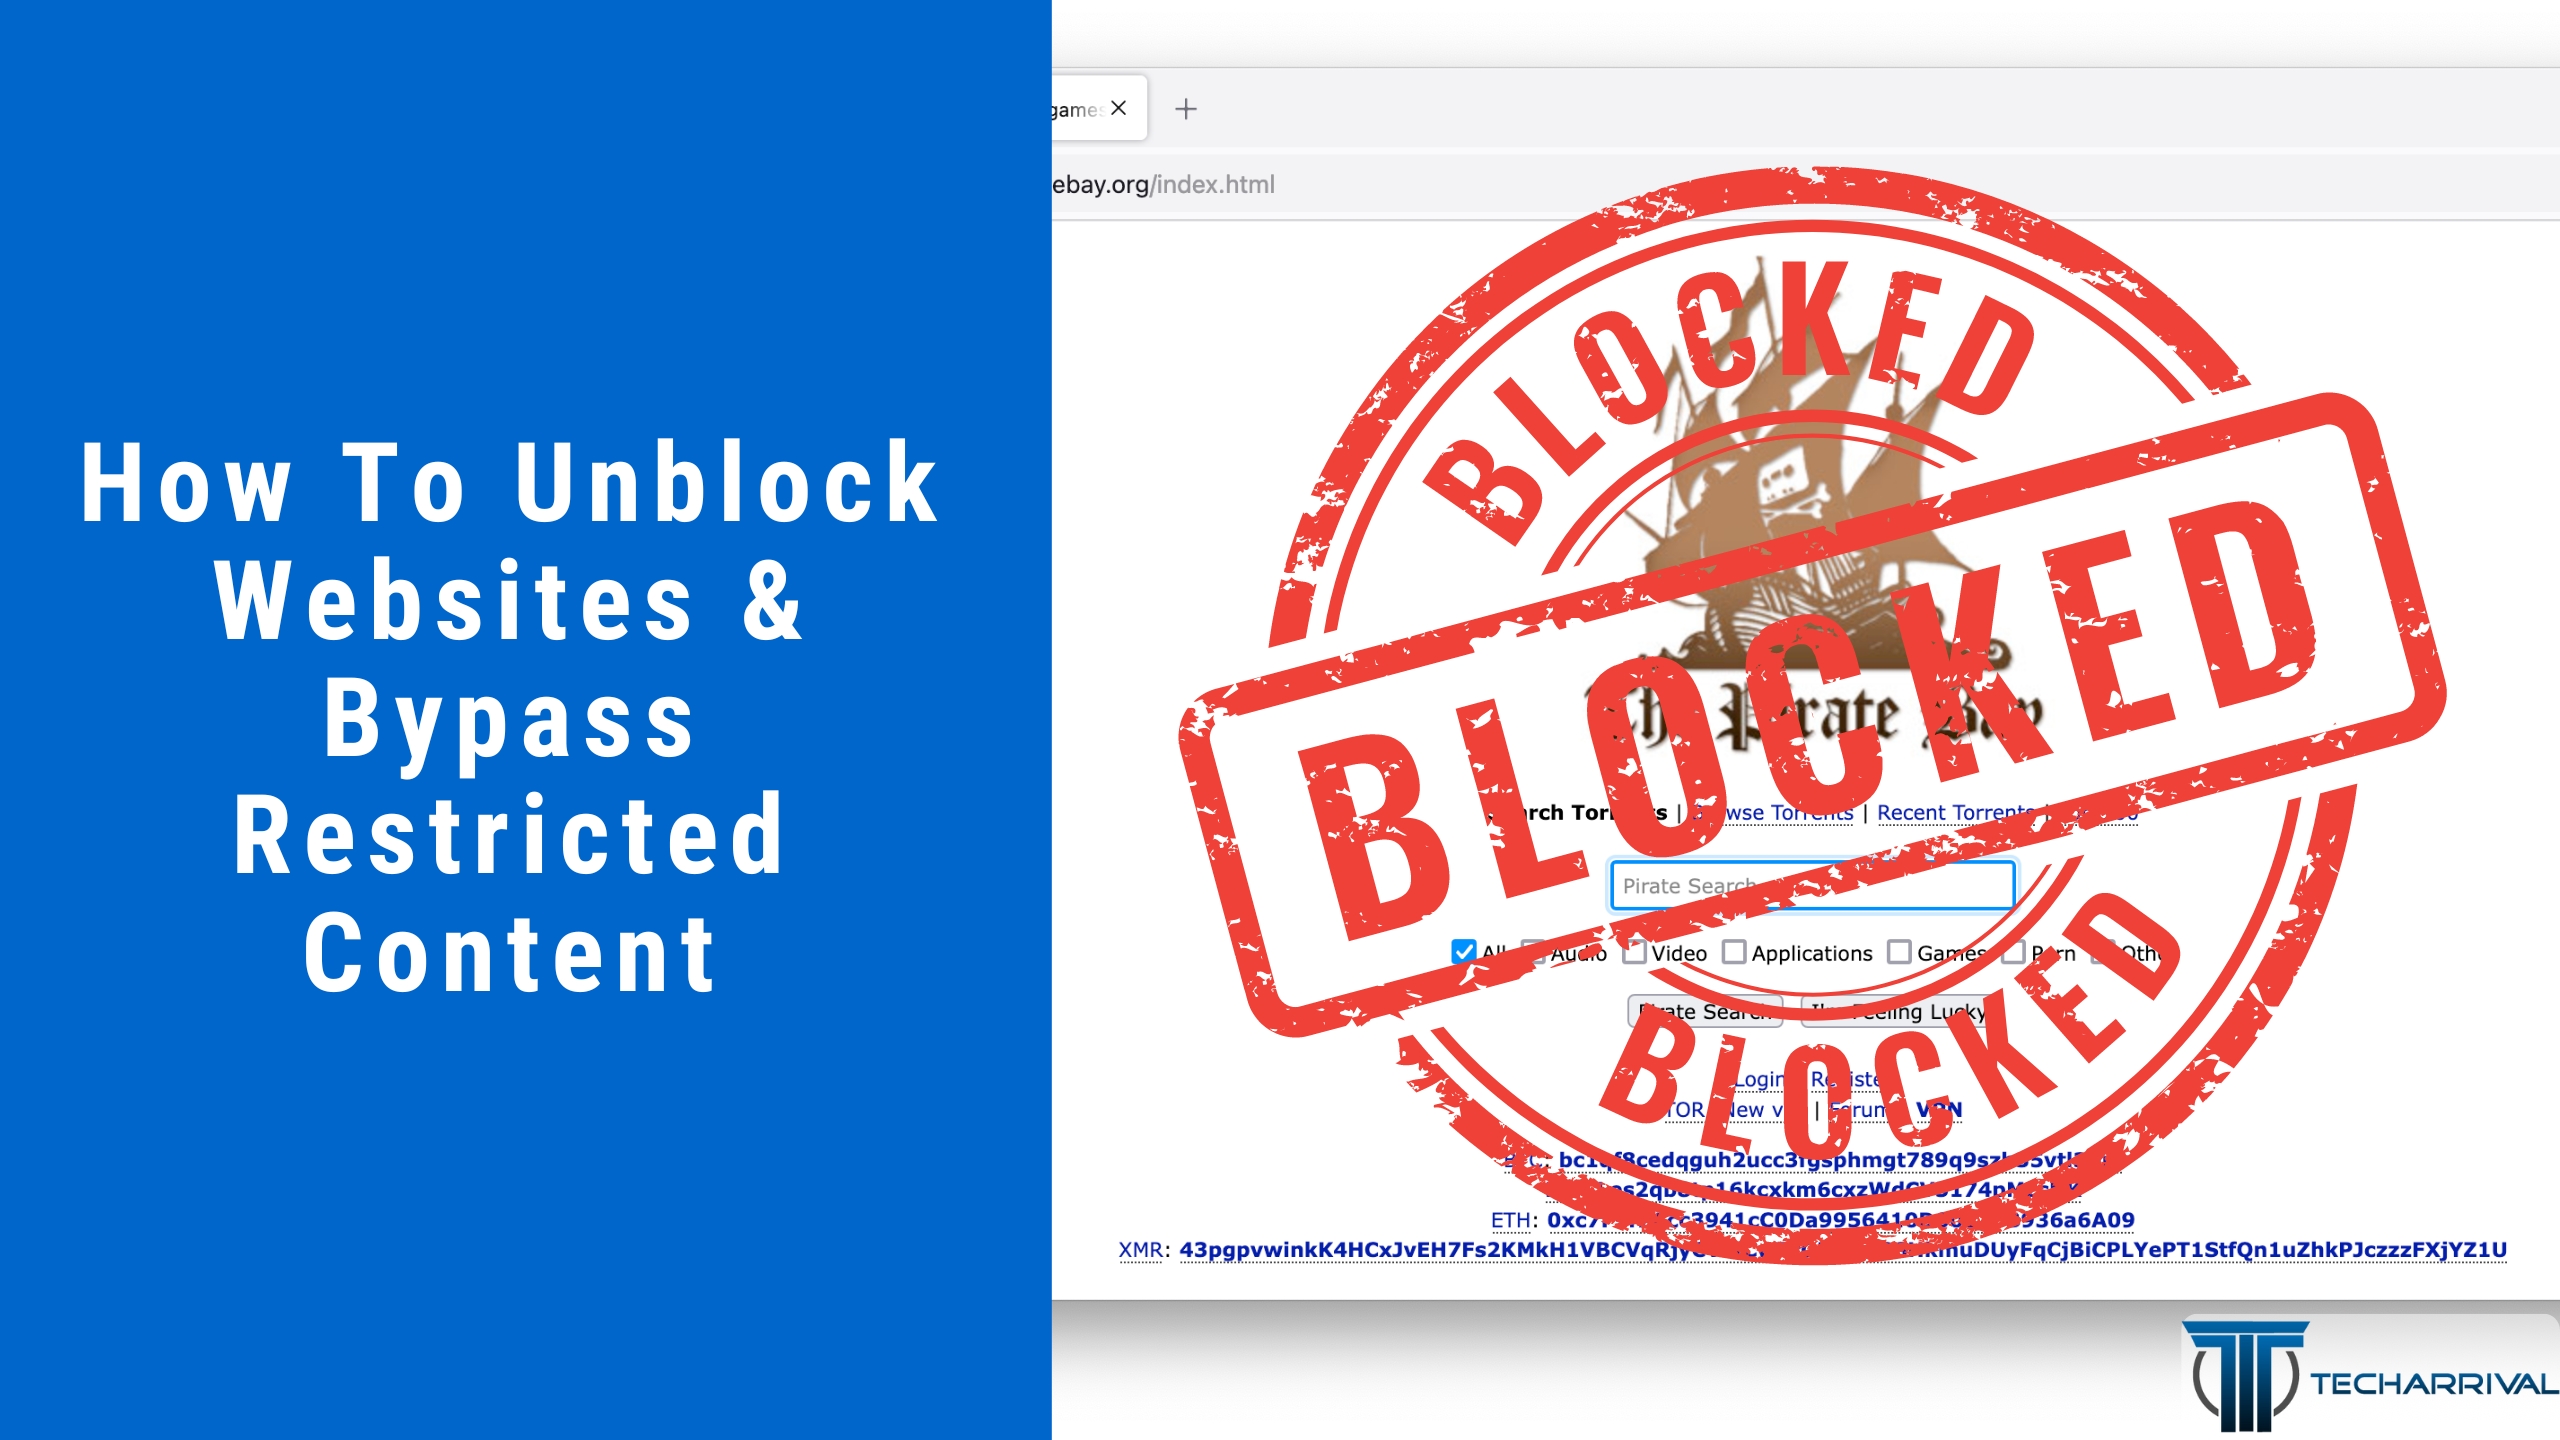 How To Unblock Websites & Bypass Restricted Content